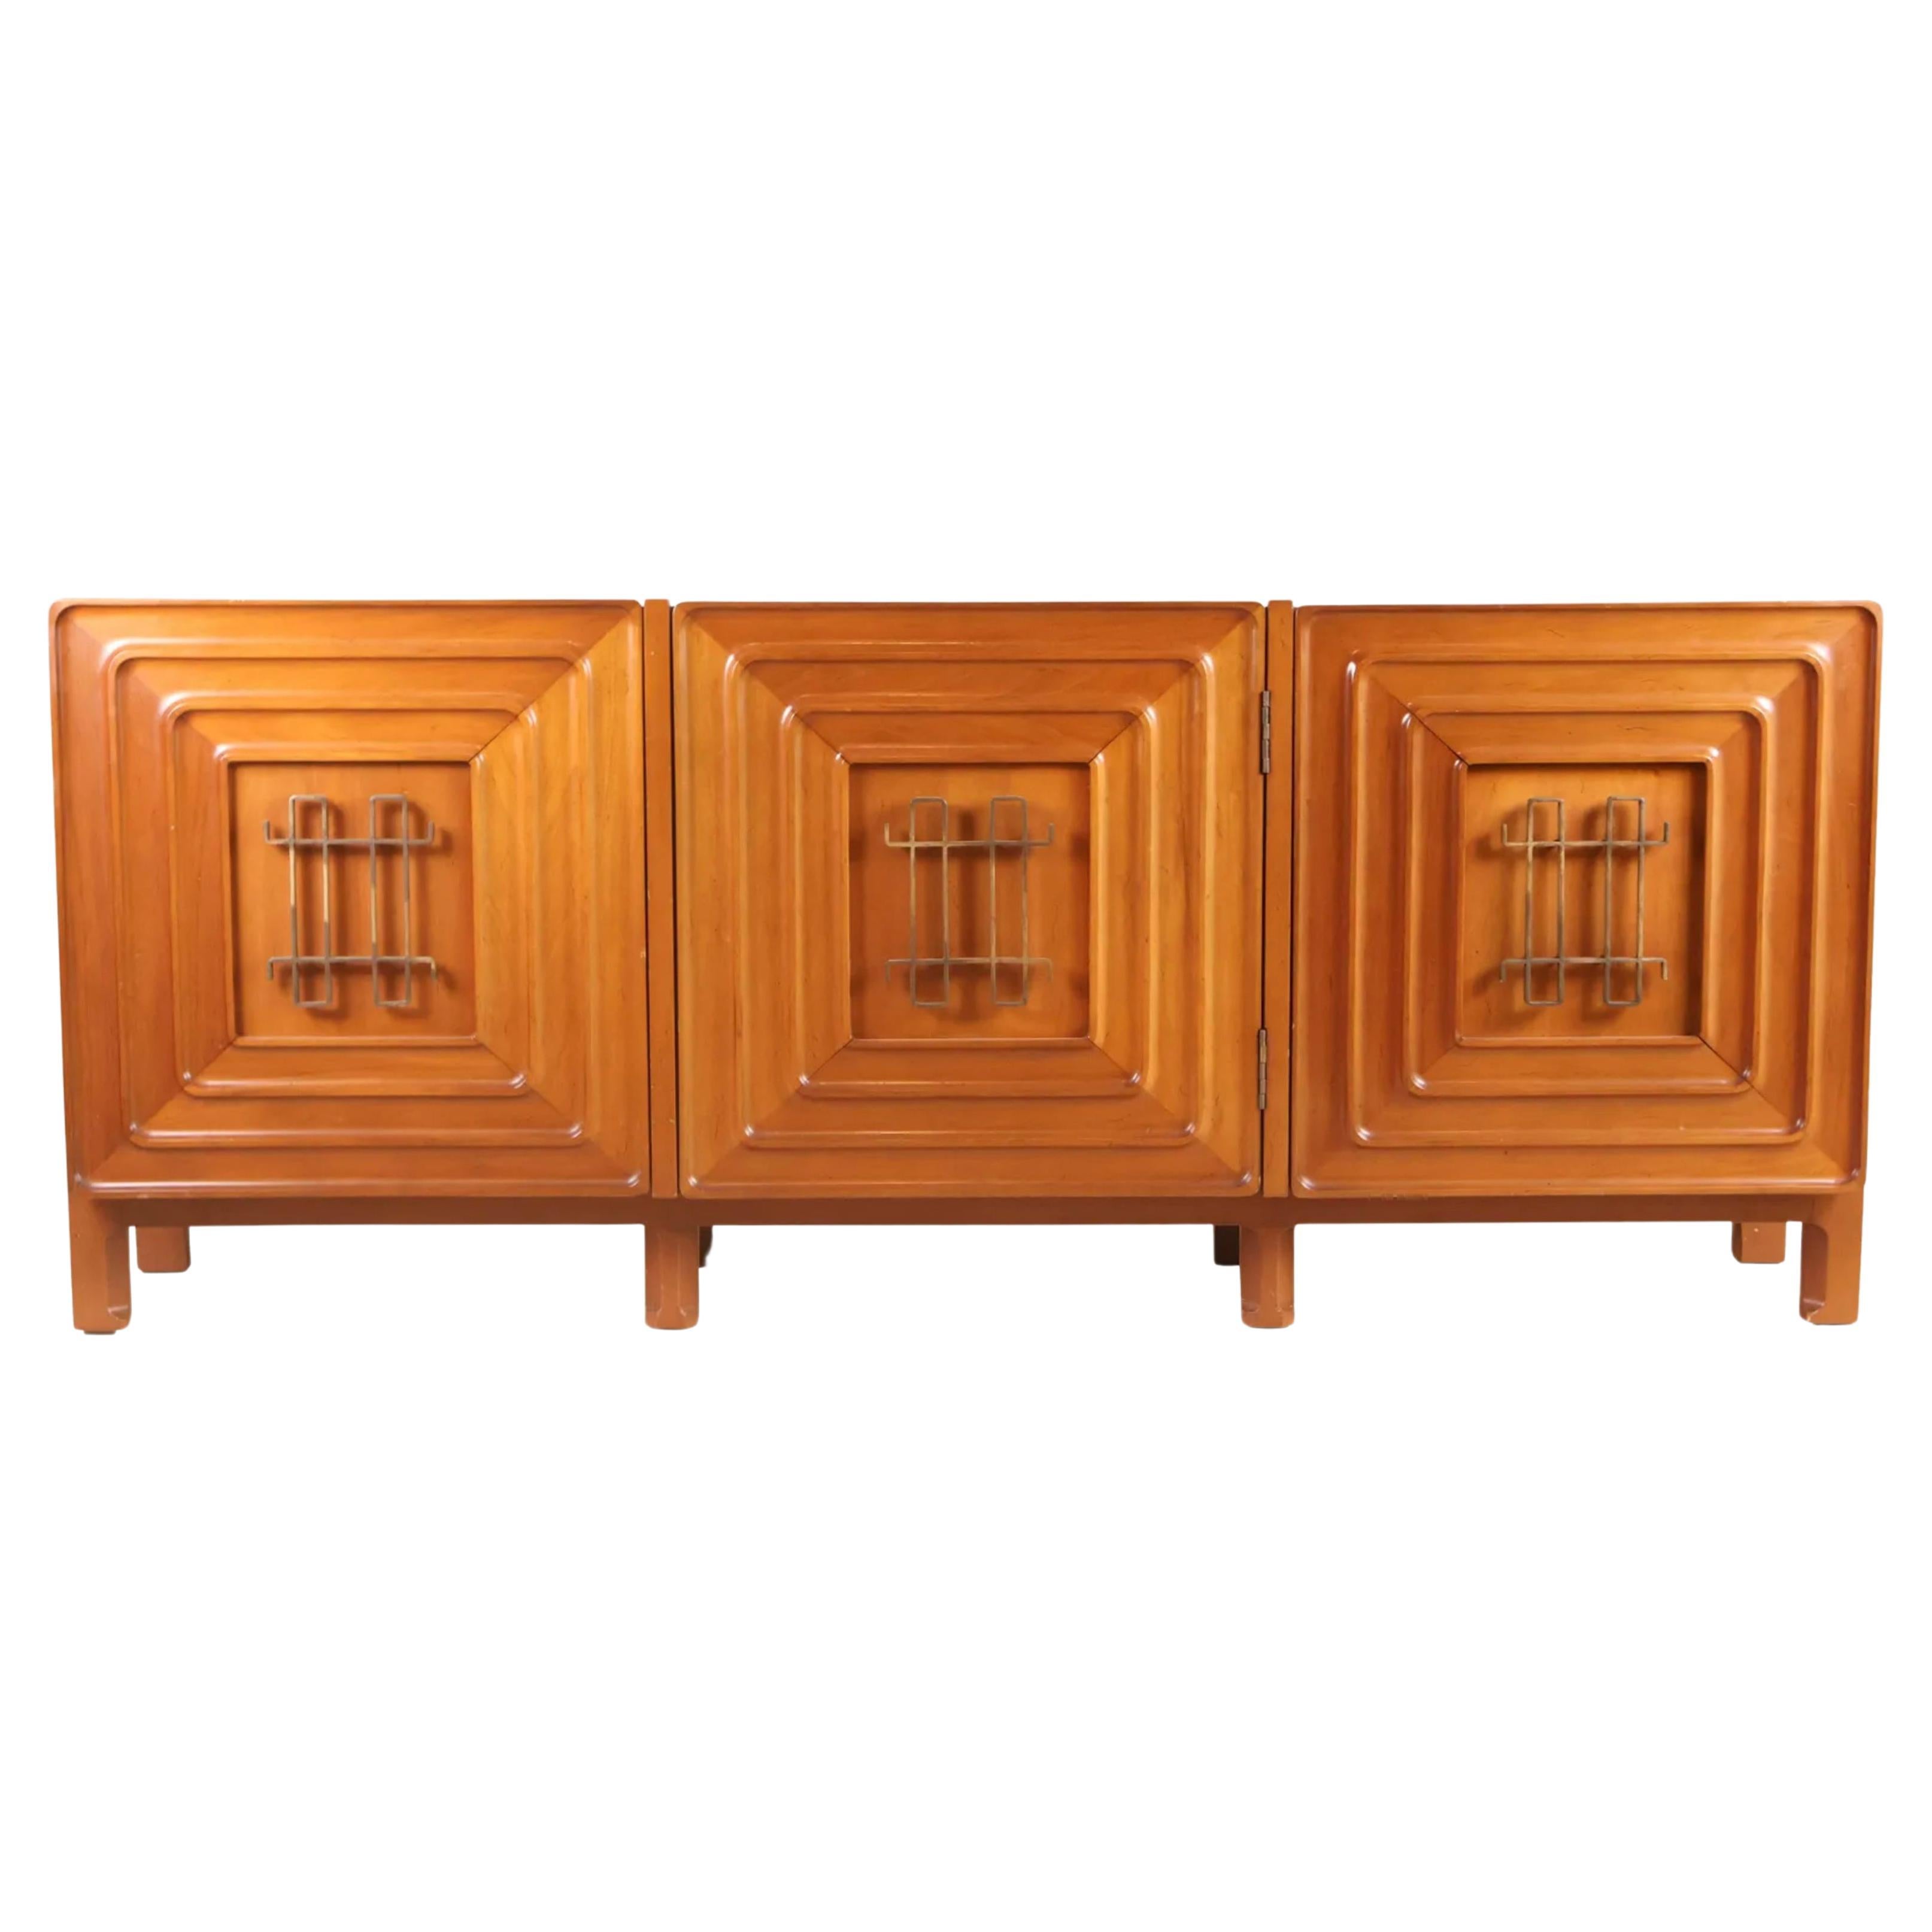 Exquisite Credenza by Edmond J. Spence made by Industria Mueblera Mexico For Sale